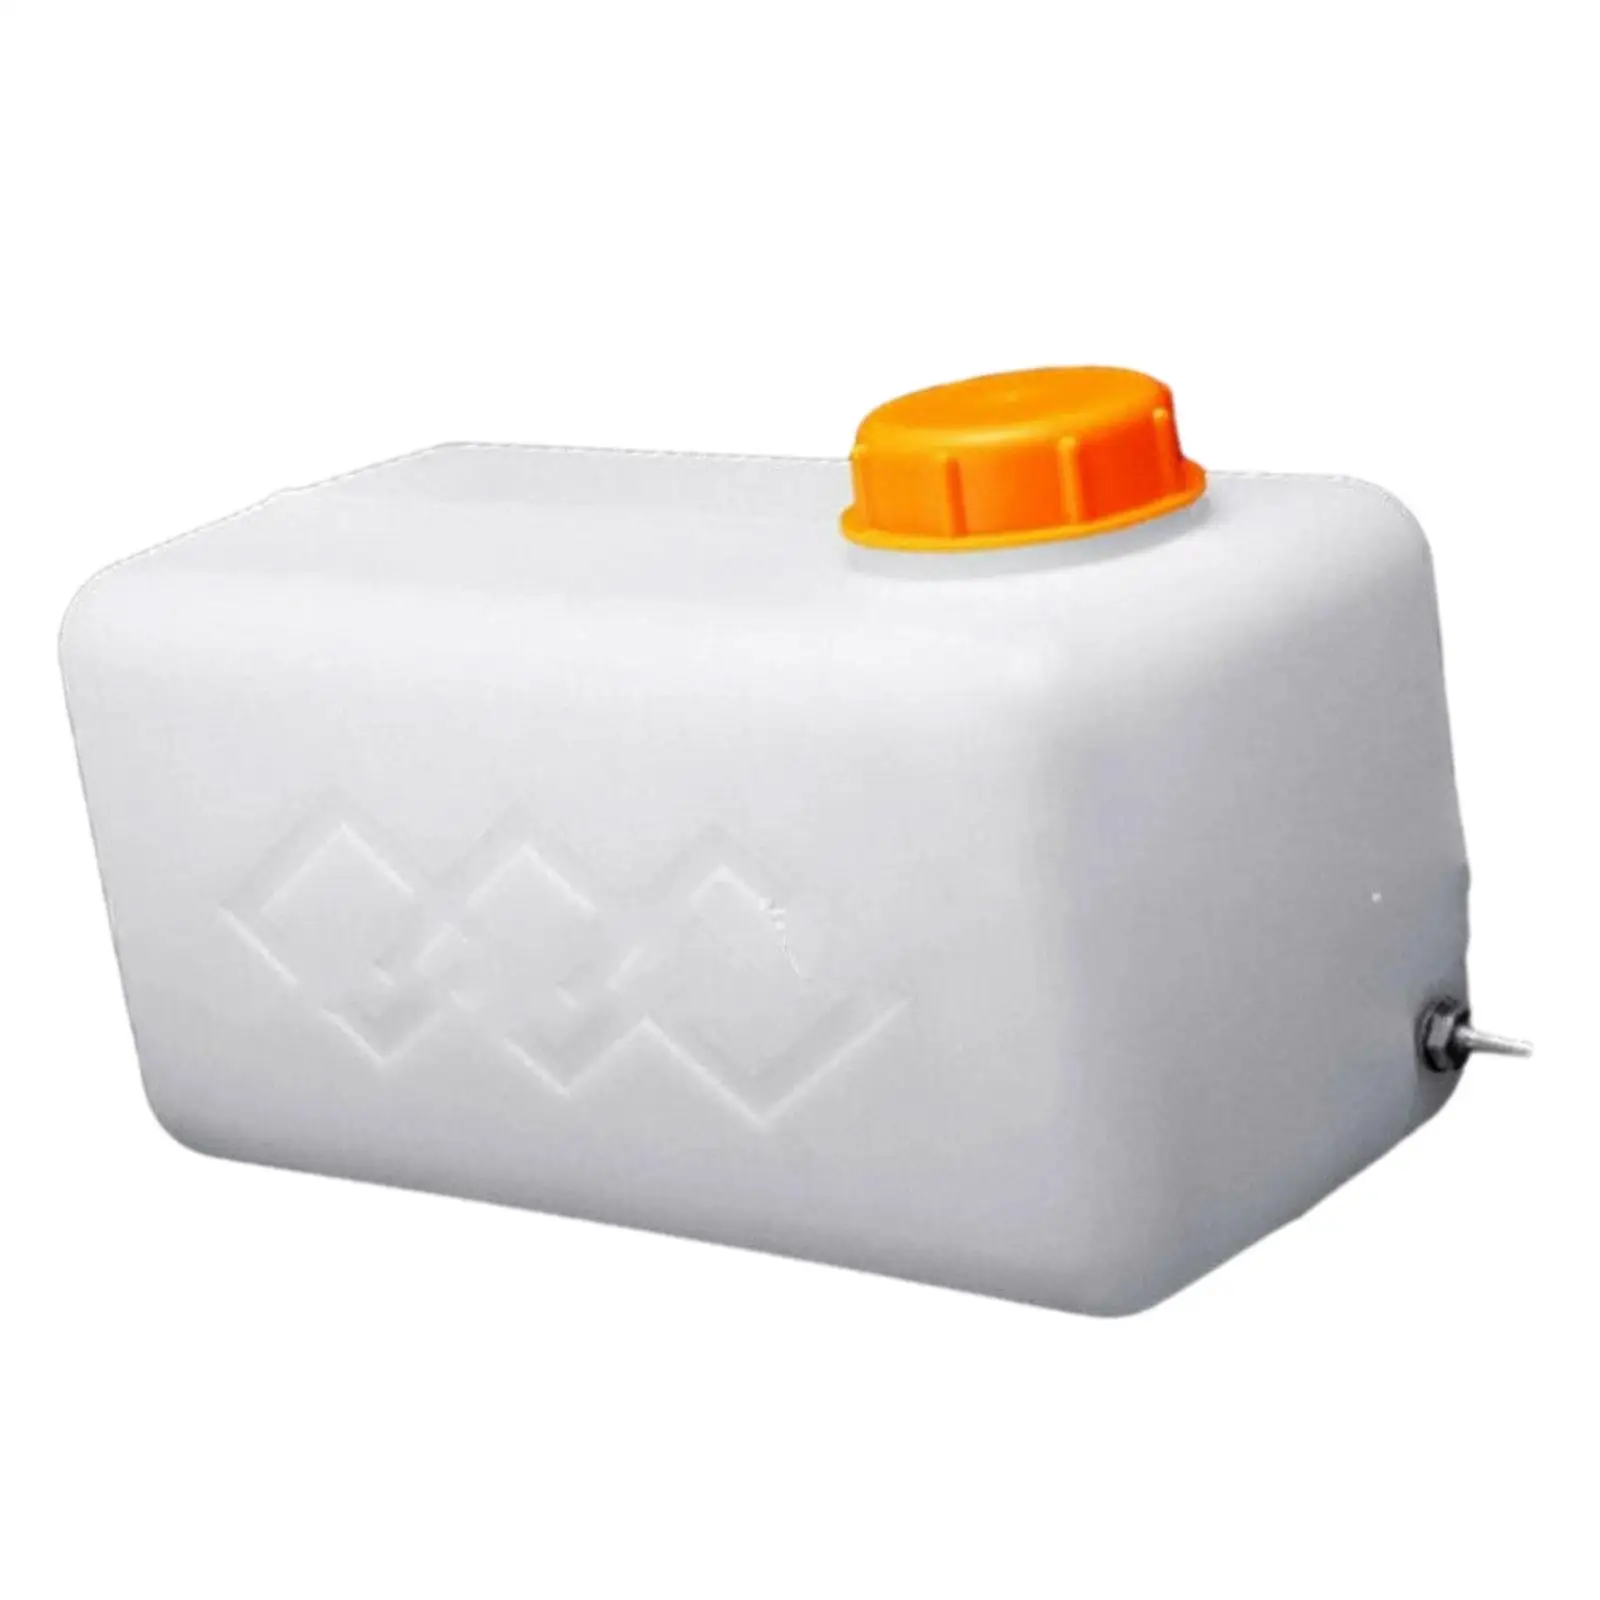 Parking Heater 5L Durable Gasoline Petrol Tank for Vehicle Boat Auto